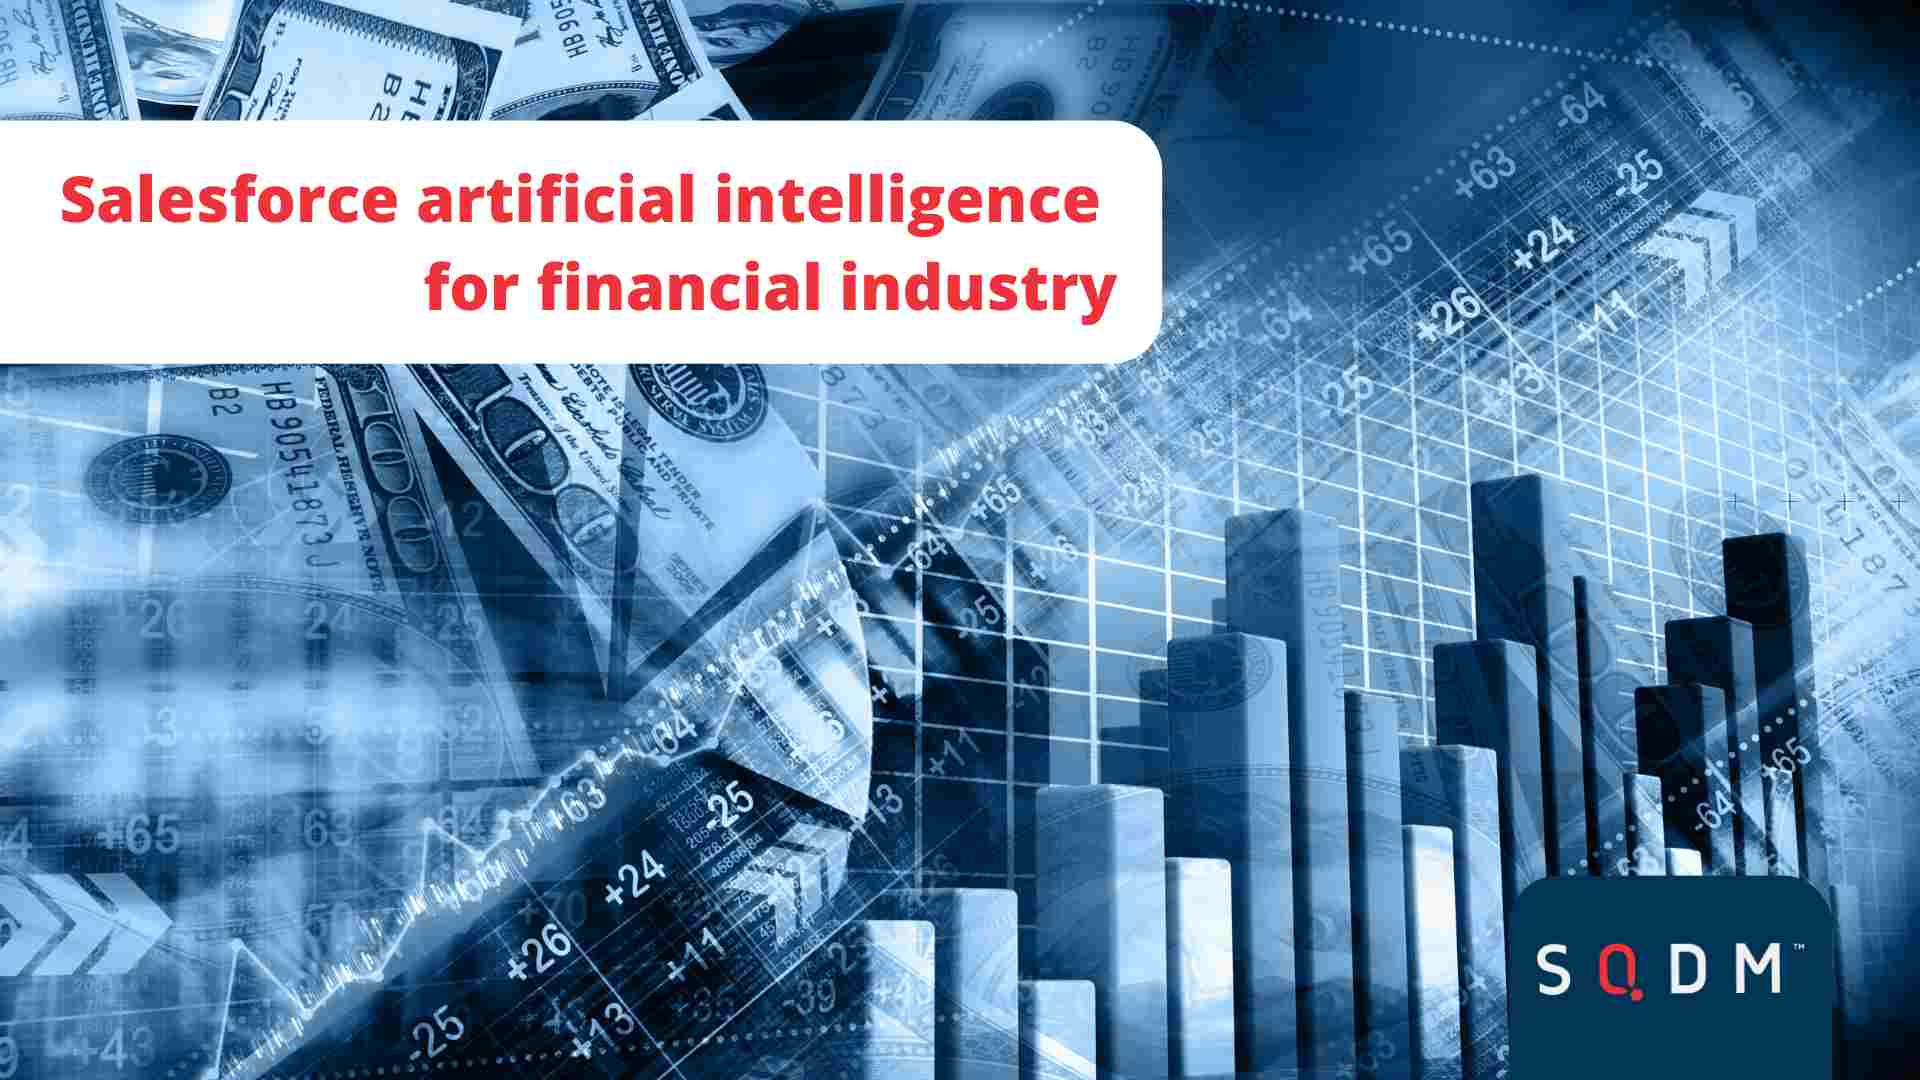 Salesforce artificial intelligence for financial industry